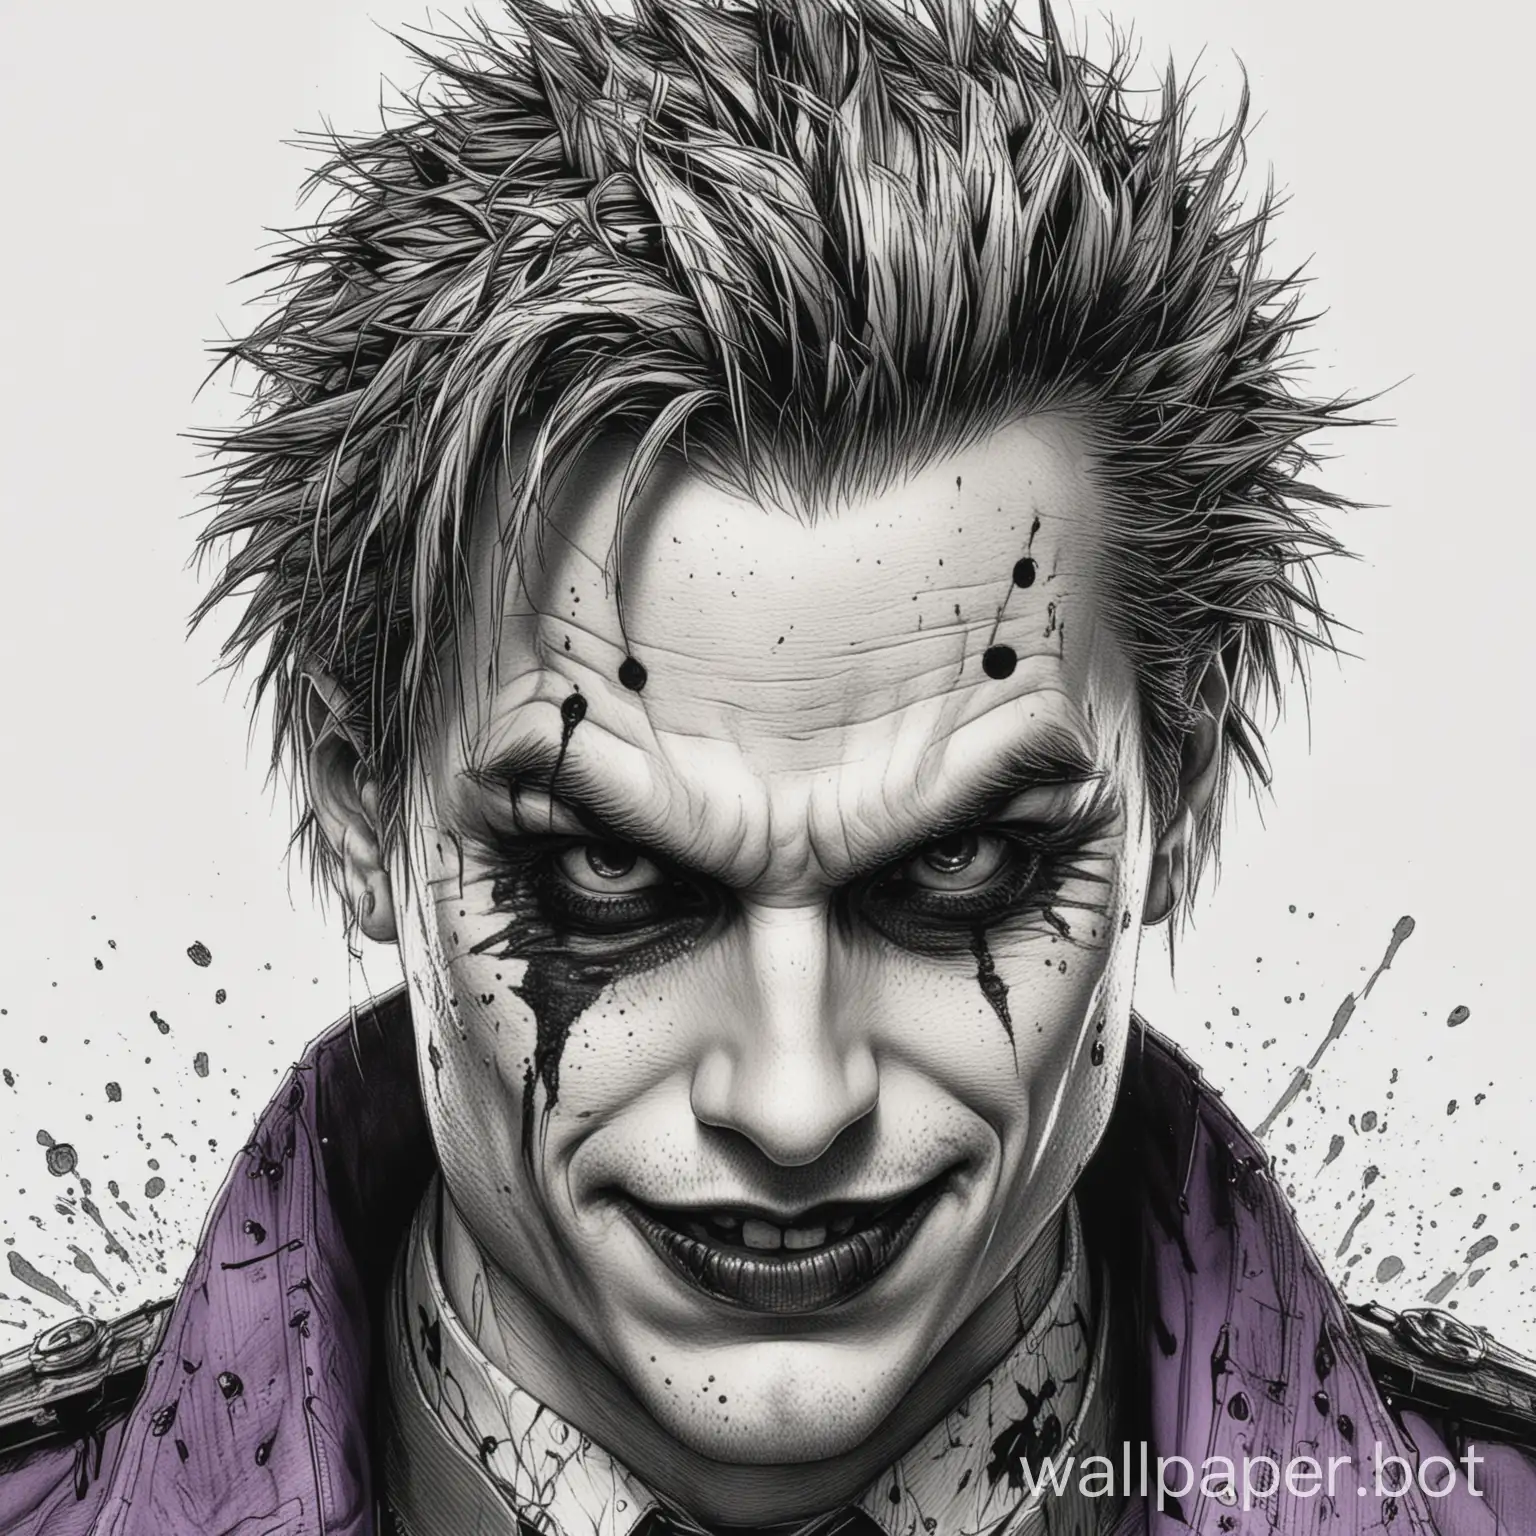 suicide squad joker, short hair, suicide squad, gangsta, serious expressive, male face drawing, explosive hatching chaotic pen art, short hair, front, lineart, comic book art, white background